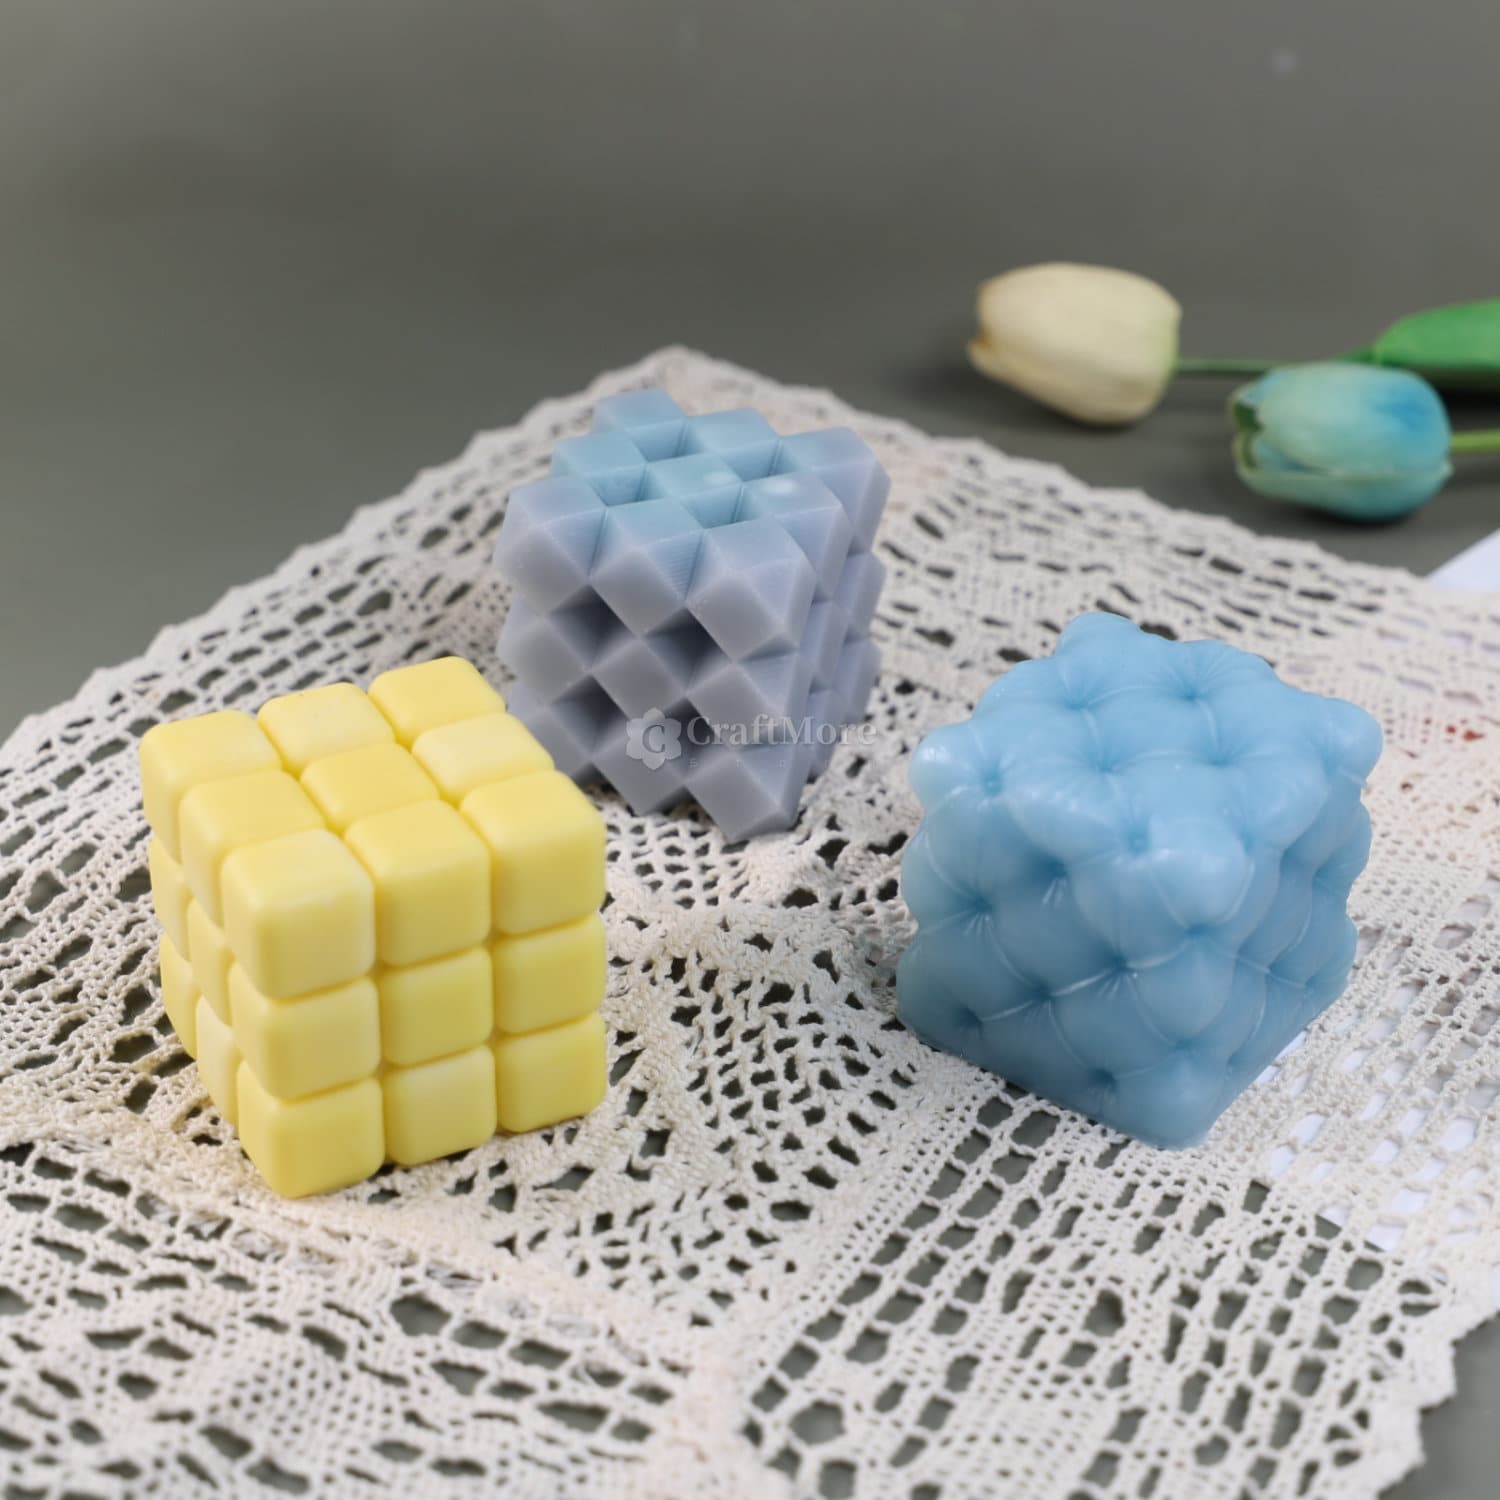 Magic Cube Candle Mold 3D Bubbles Candle Silicone Mold Atom Cube Mold Aroma  Mold Handmade Soap Mold Epoxy Plaster Mold,diy Candle Craft,g247 